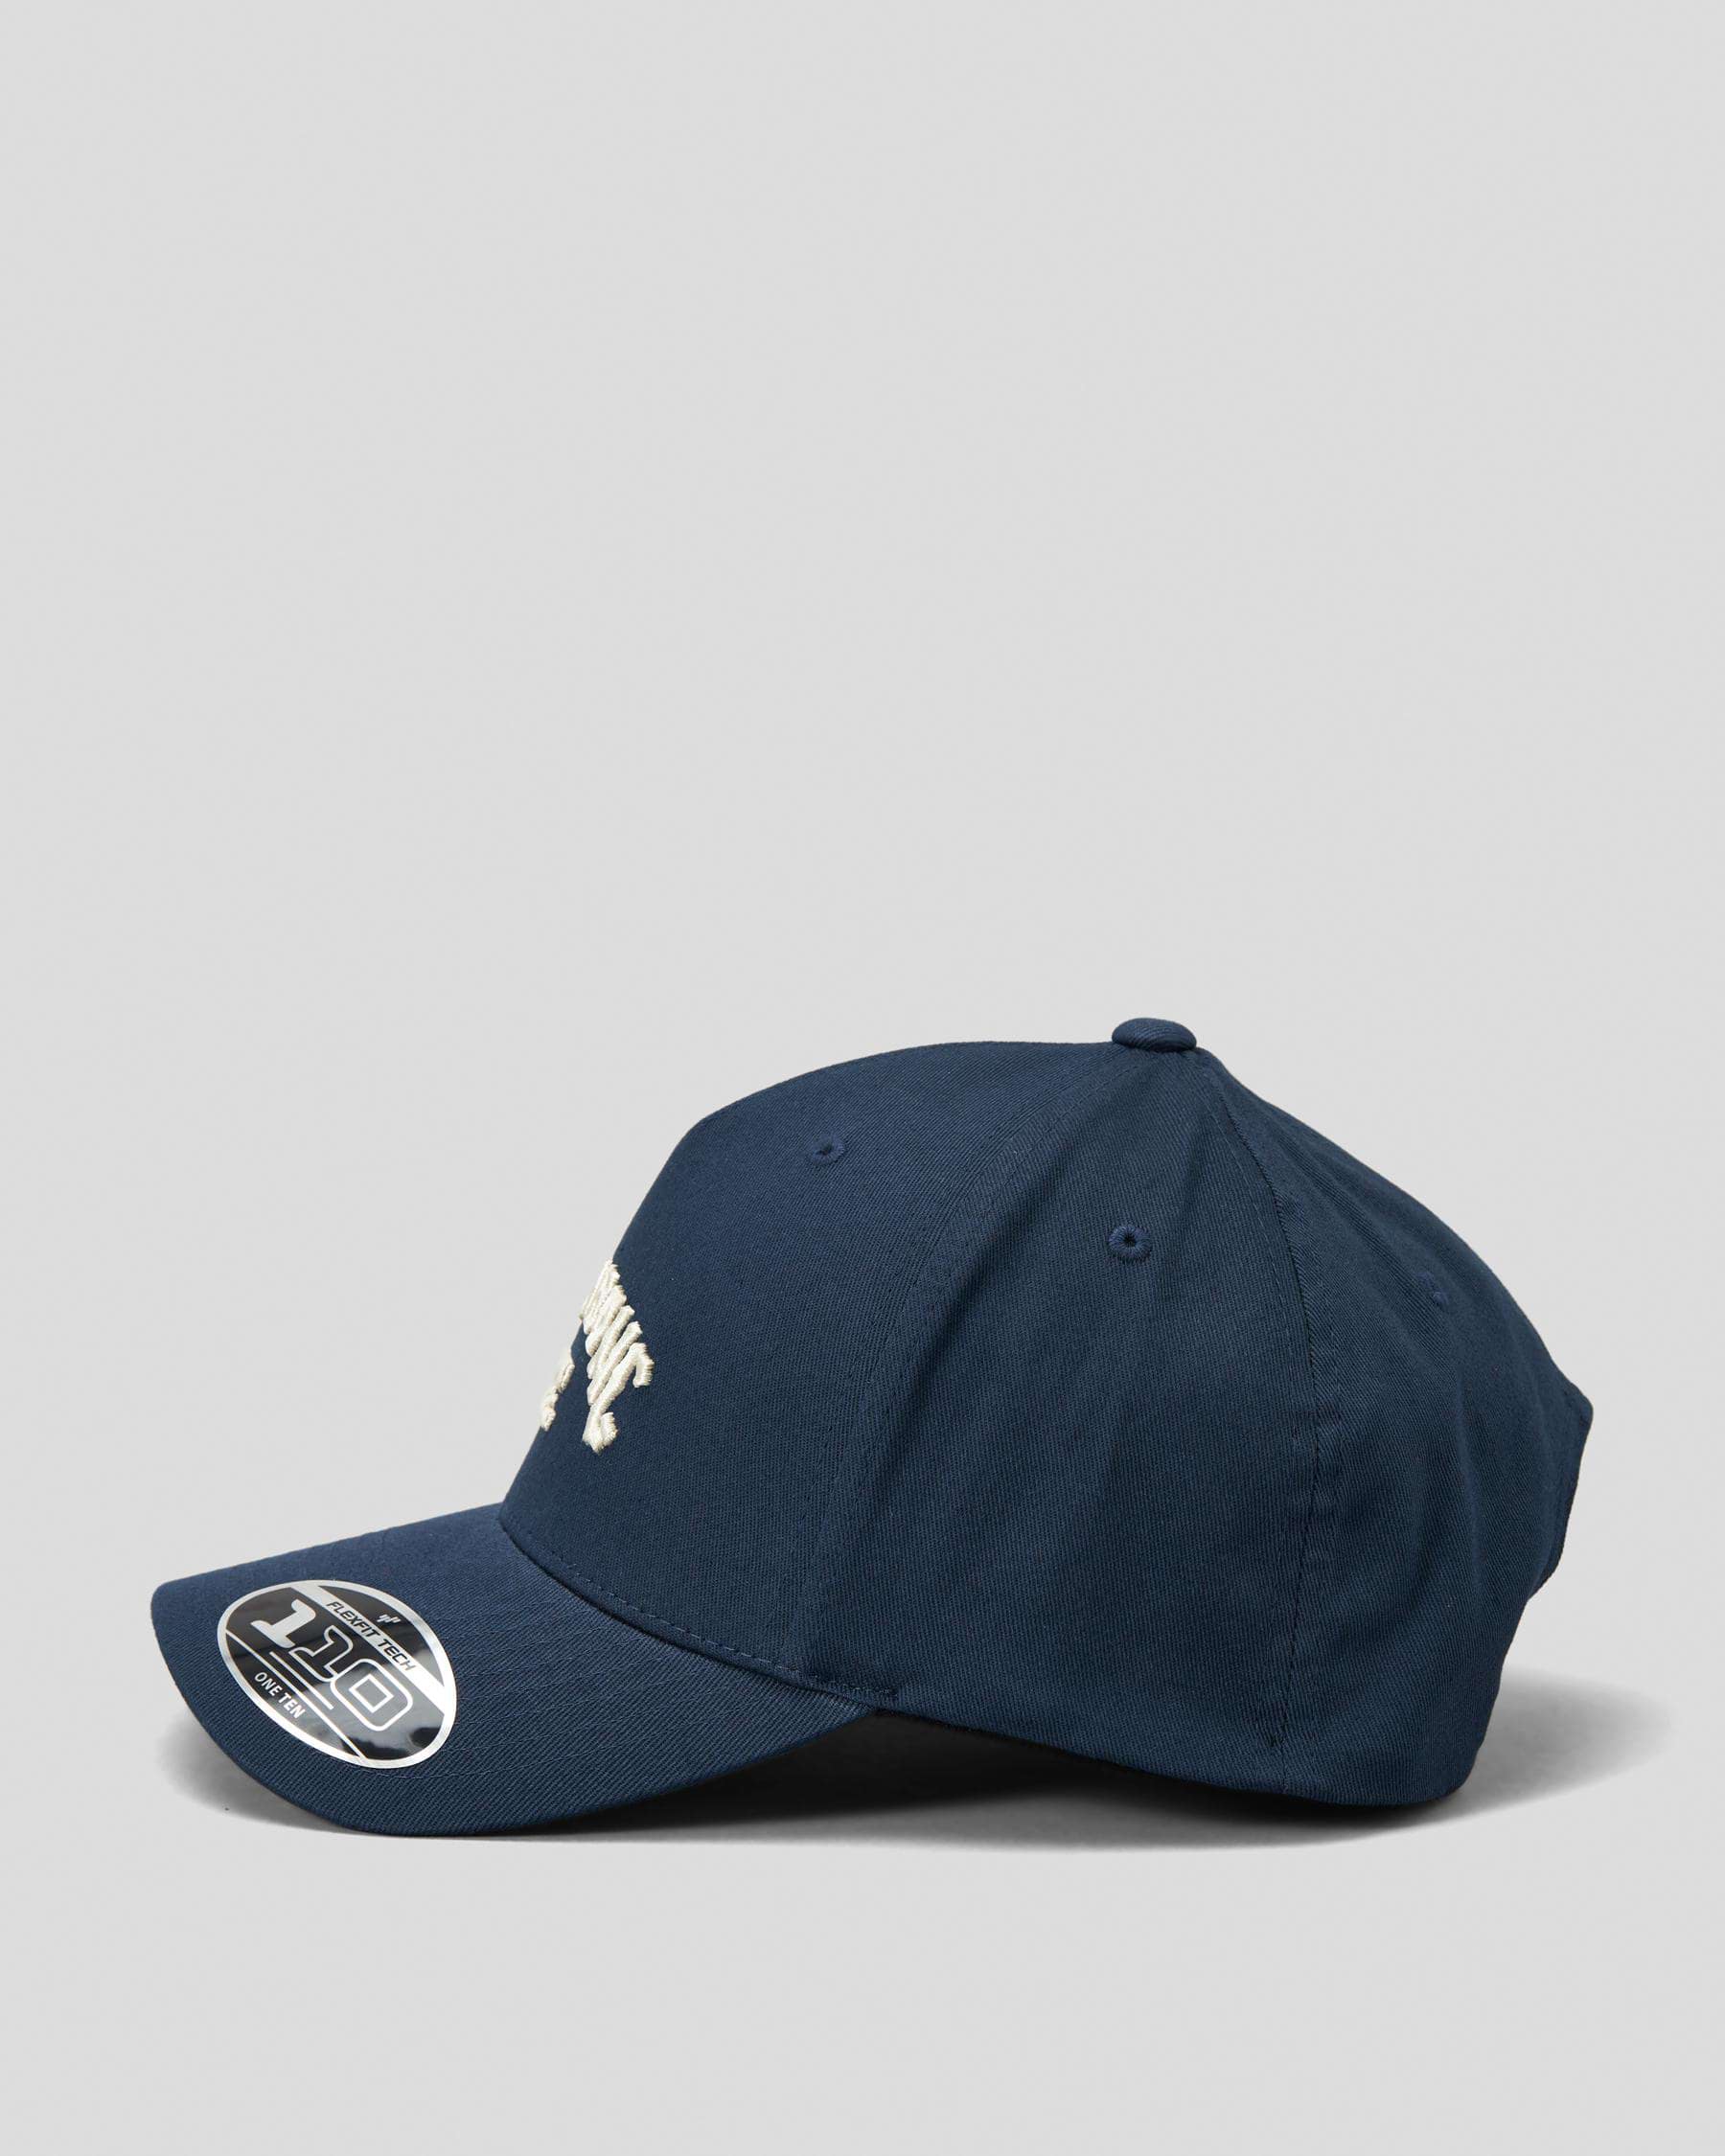 States Easy United Navy Billabong & City FREE* - Beach 110 Snapback Returns Shipping Cap Arch In Flexfit -